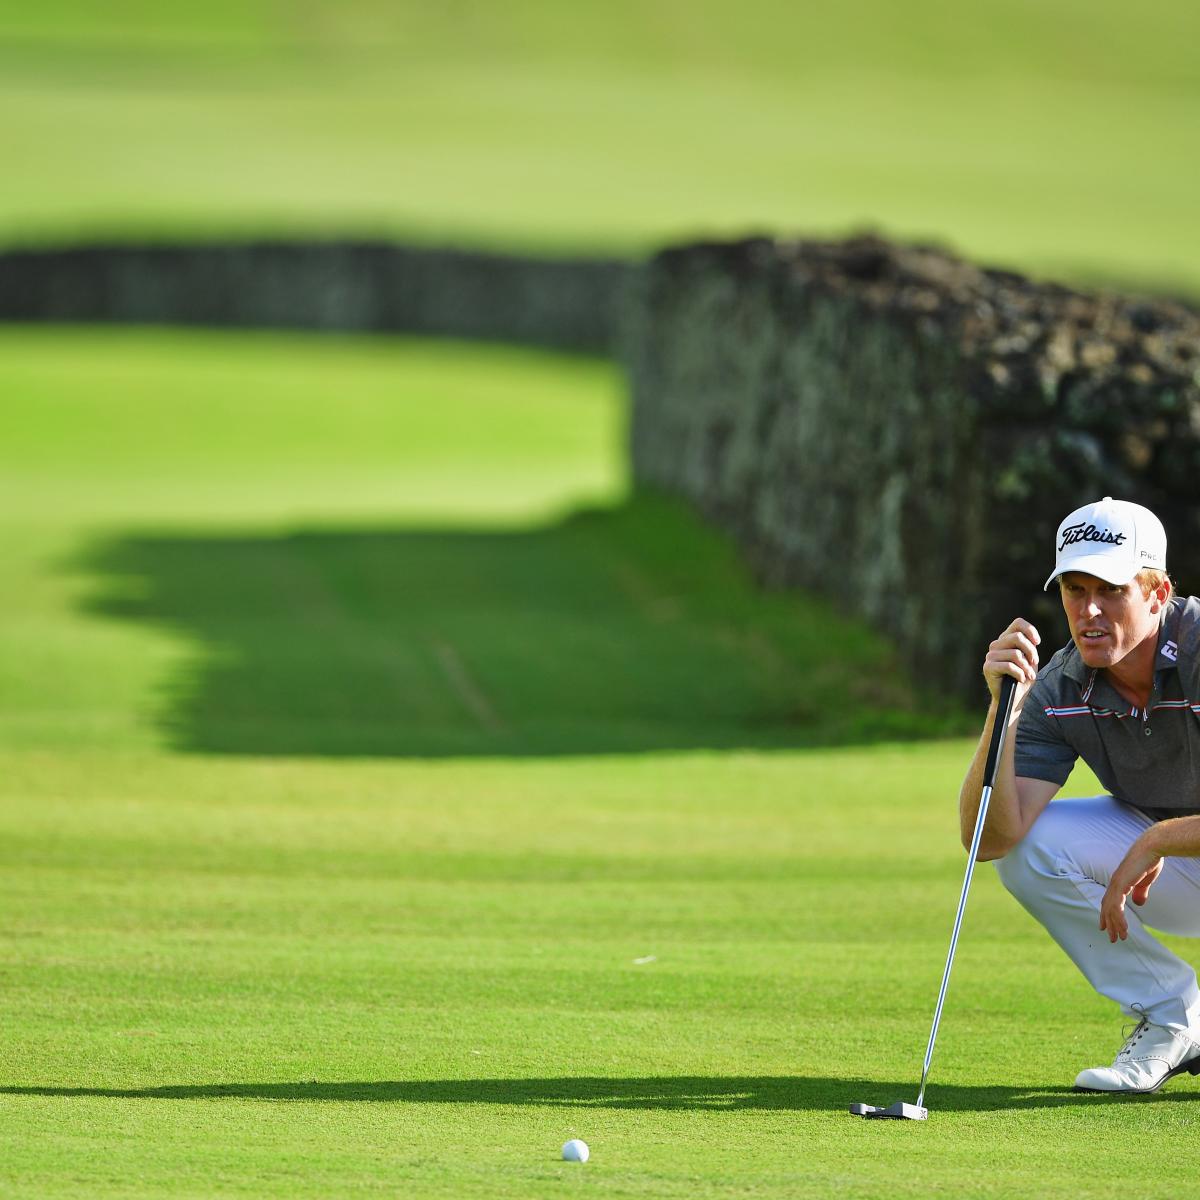 Mauritius Open 2016 Thursday Leaderboard Scores And Highlights News Scores Highlights 